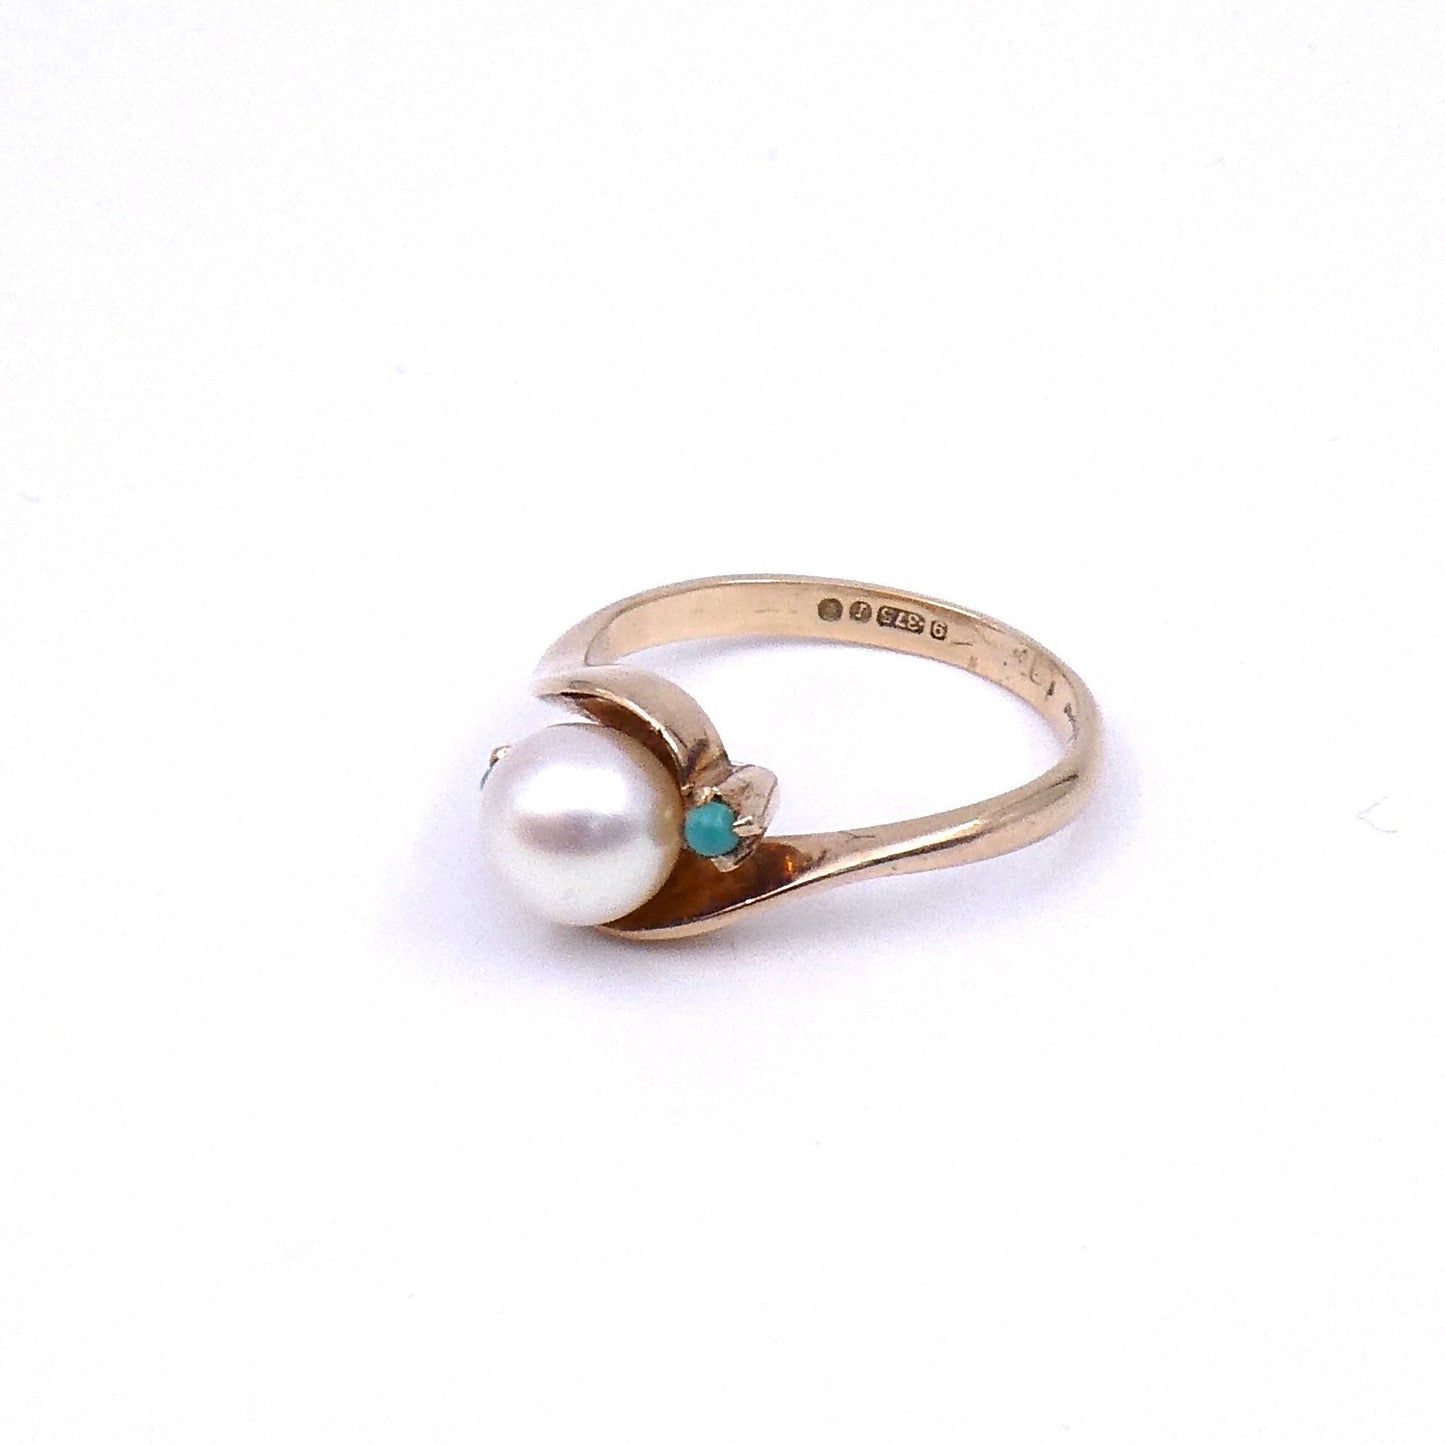 Vintage turquoise ring, a delicate pretty ring hallmarked 9kt. - Collected